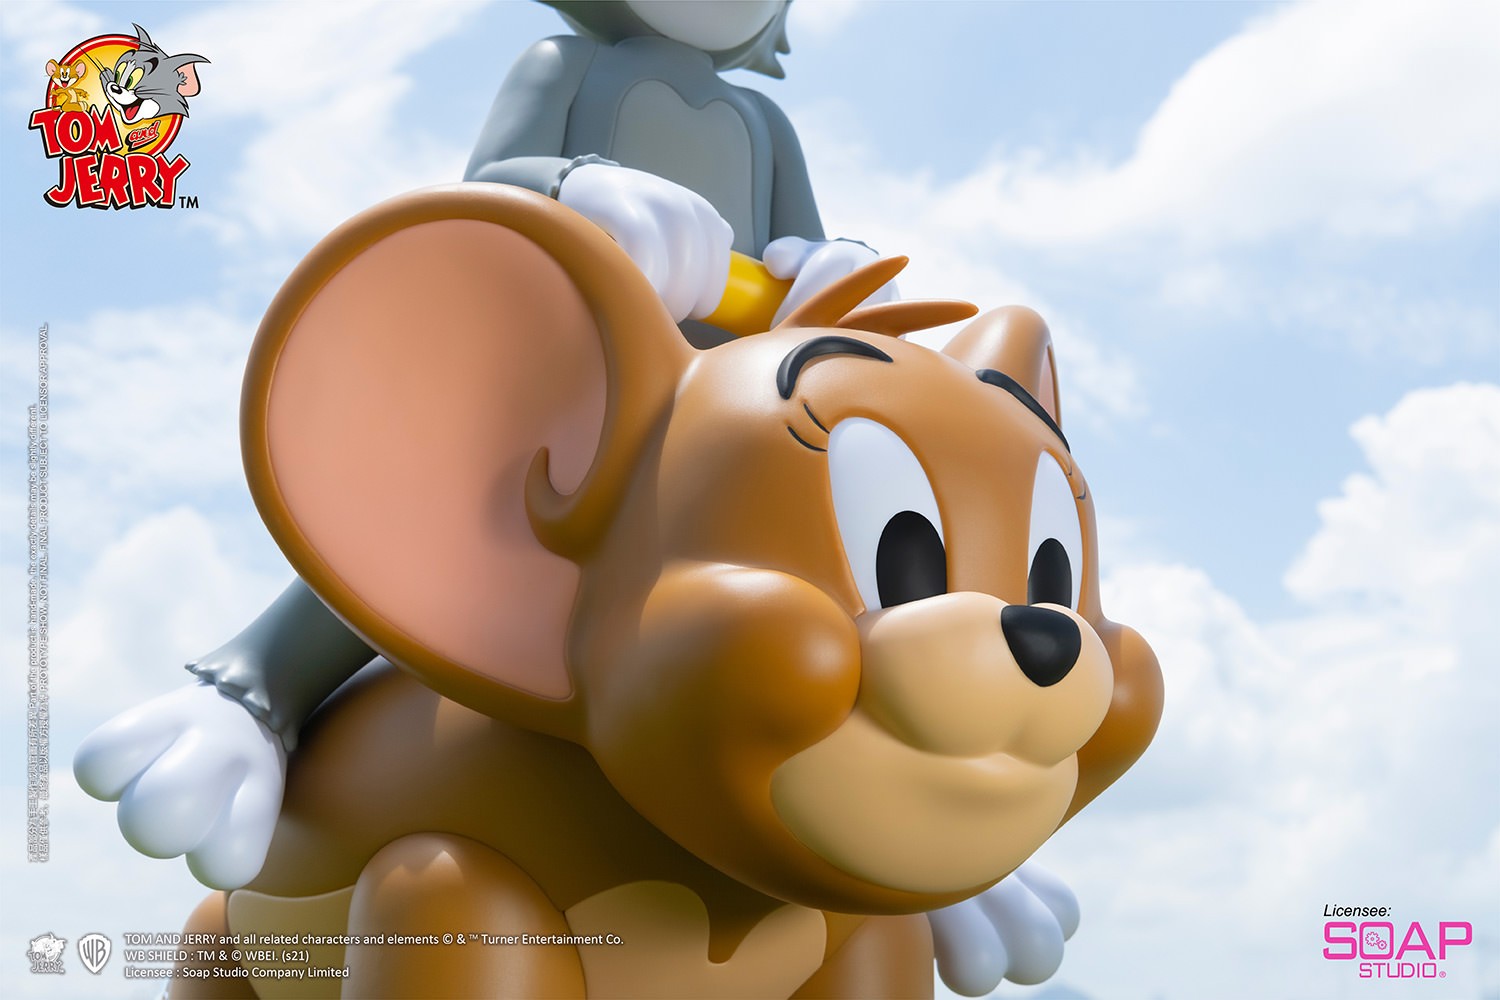 Tom and Jerry Mega Piggyback Ride (700% Version) (Prototype Shown) View 5